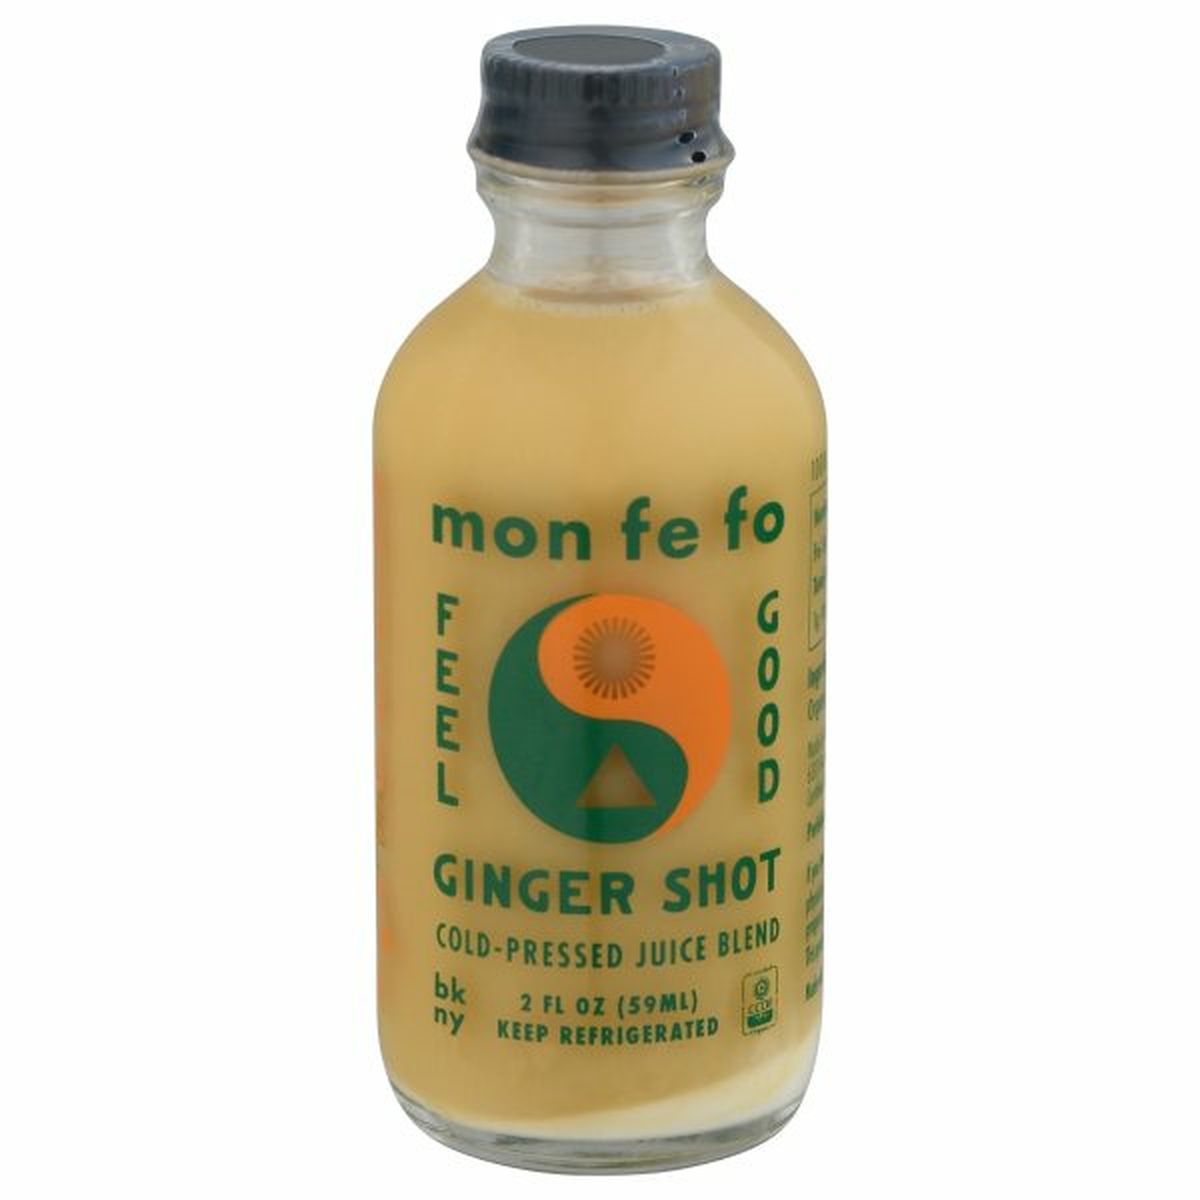 Calories in Mon Fe Fo Ginger Shot